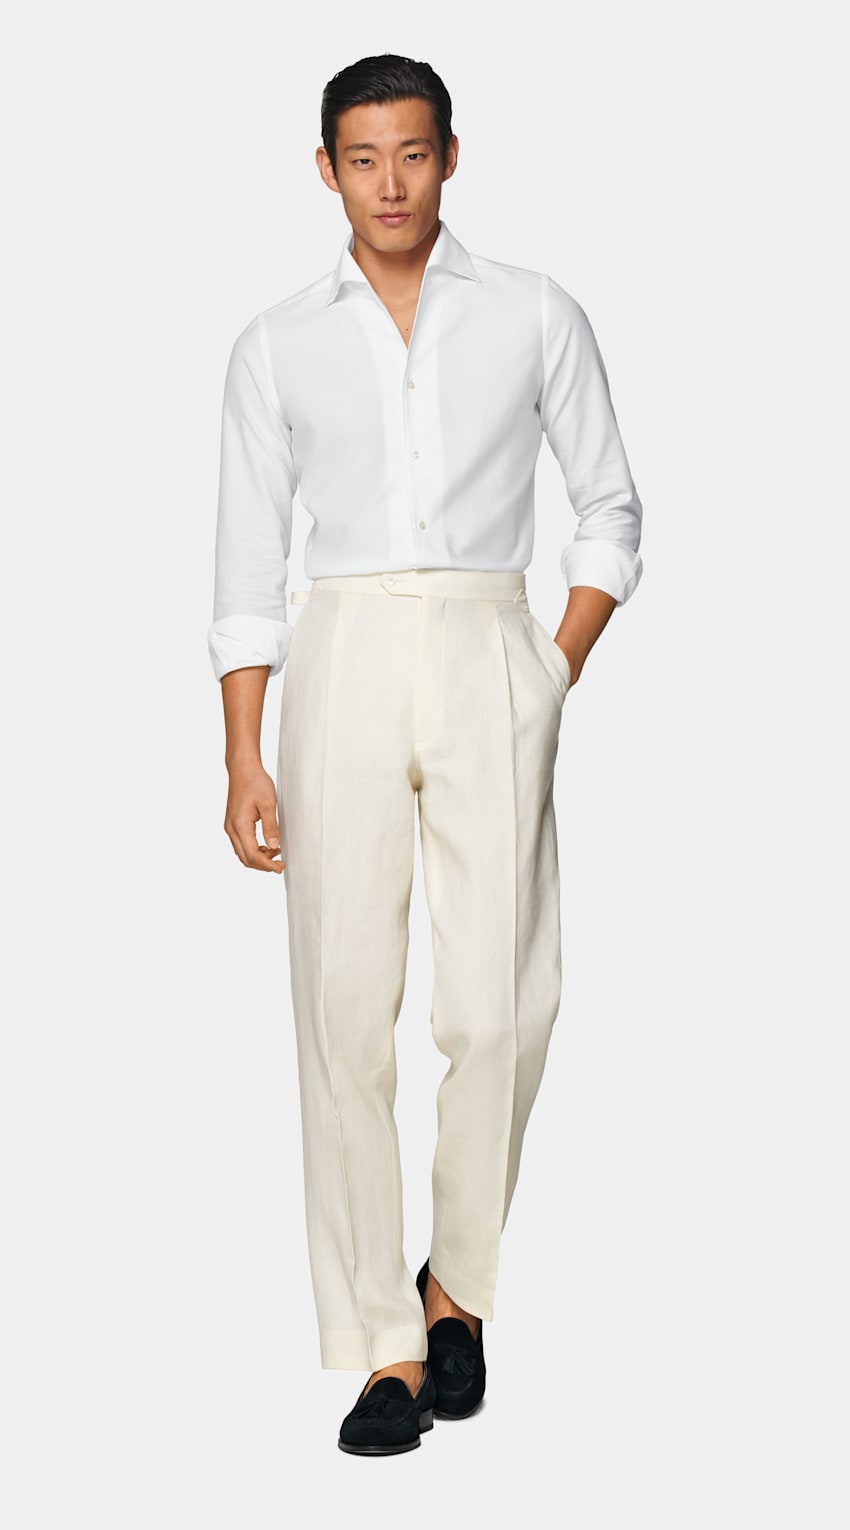 SUITSUPPLY Egyptian Cotton by Albini, Italy White Extra Slim Fit Shirt